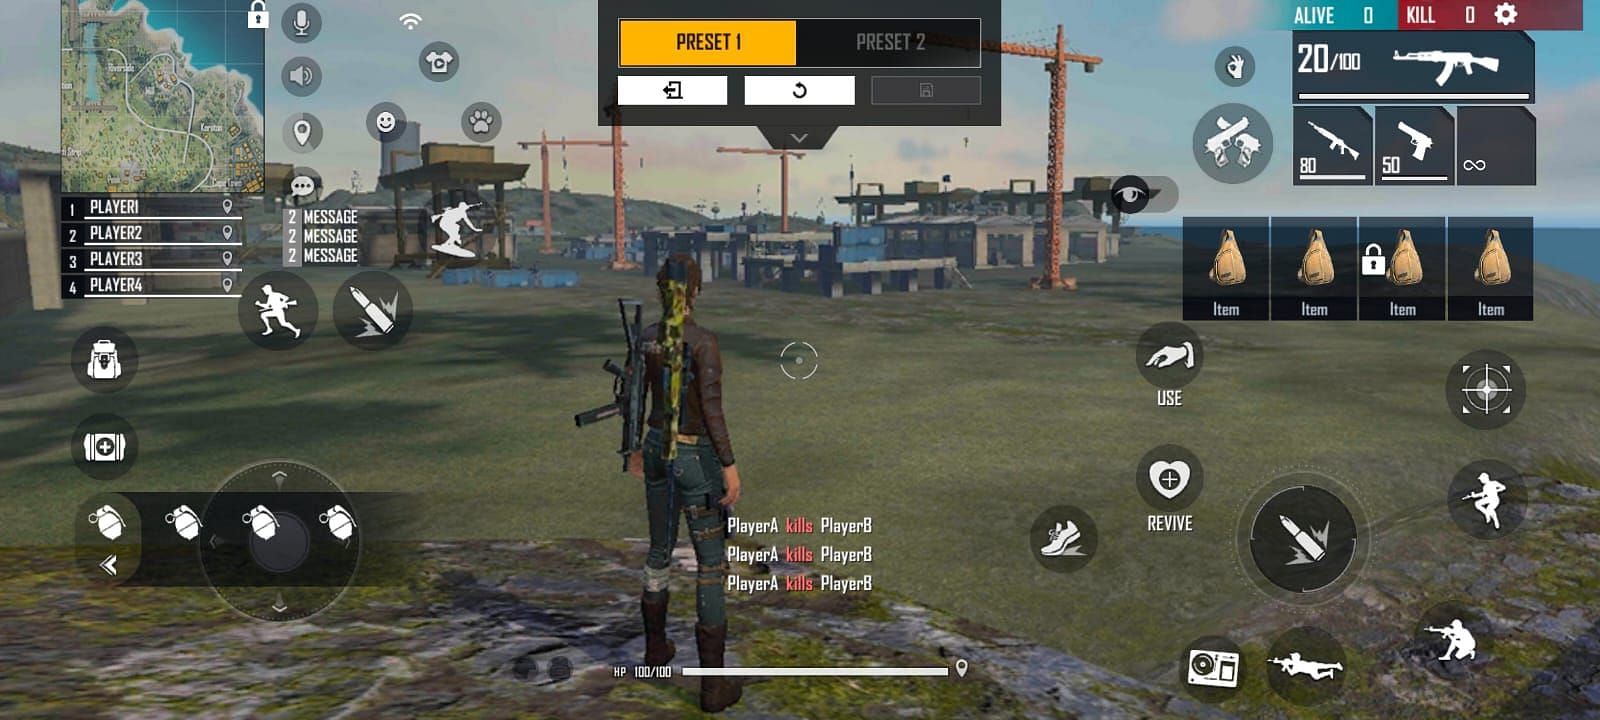 Customizing the HUD layout is crucial for aiming (Image via Garena Free Fire)